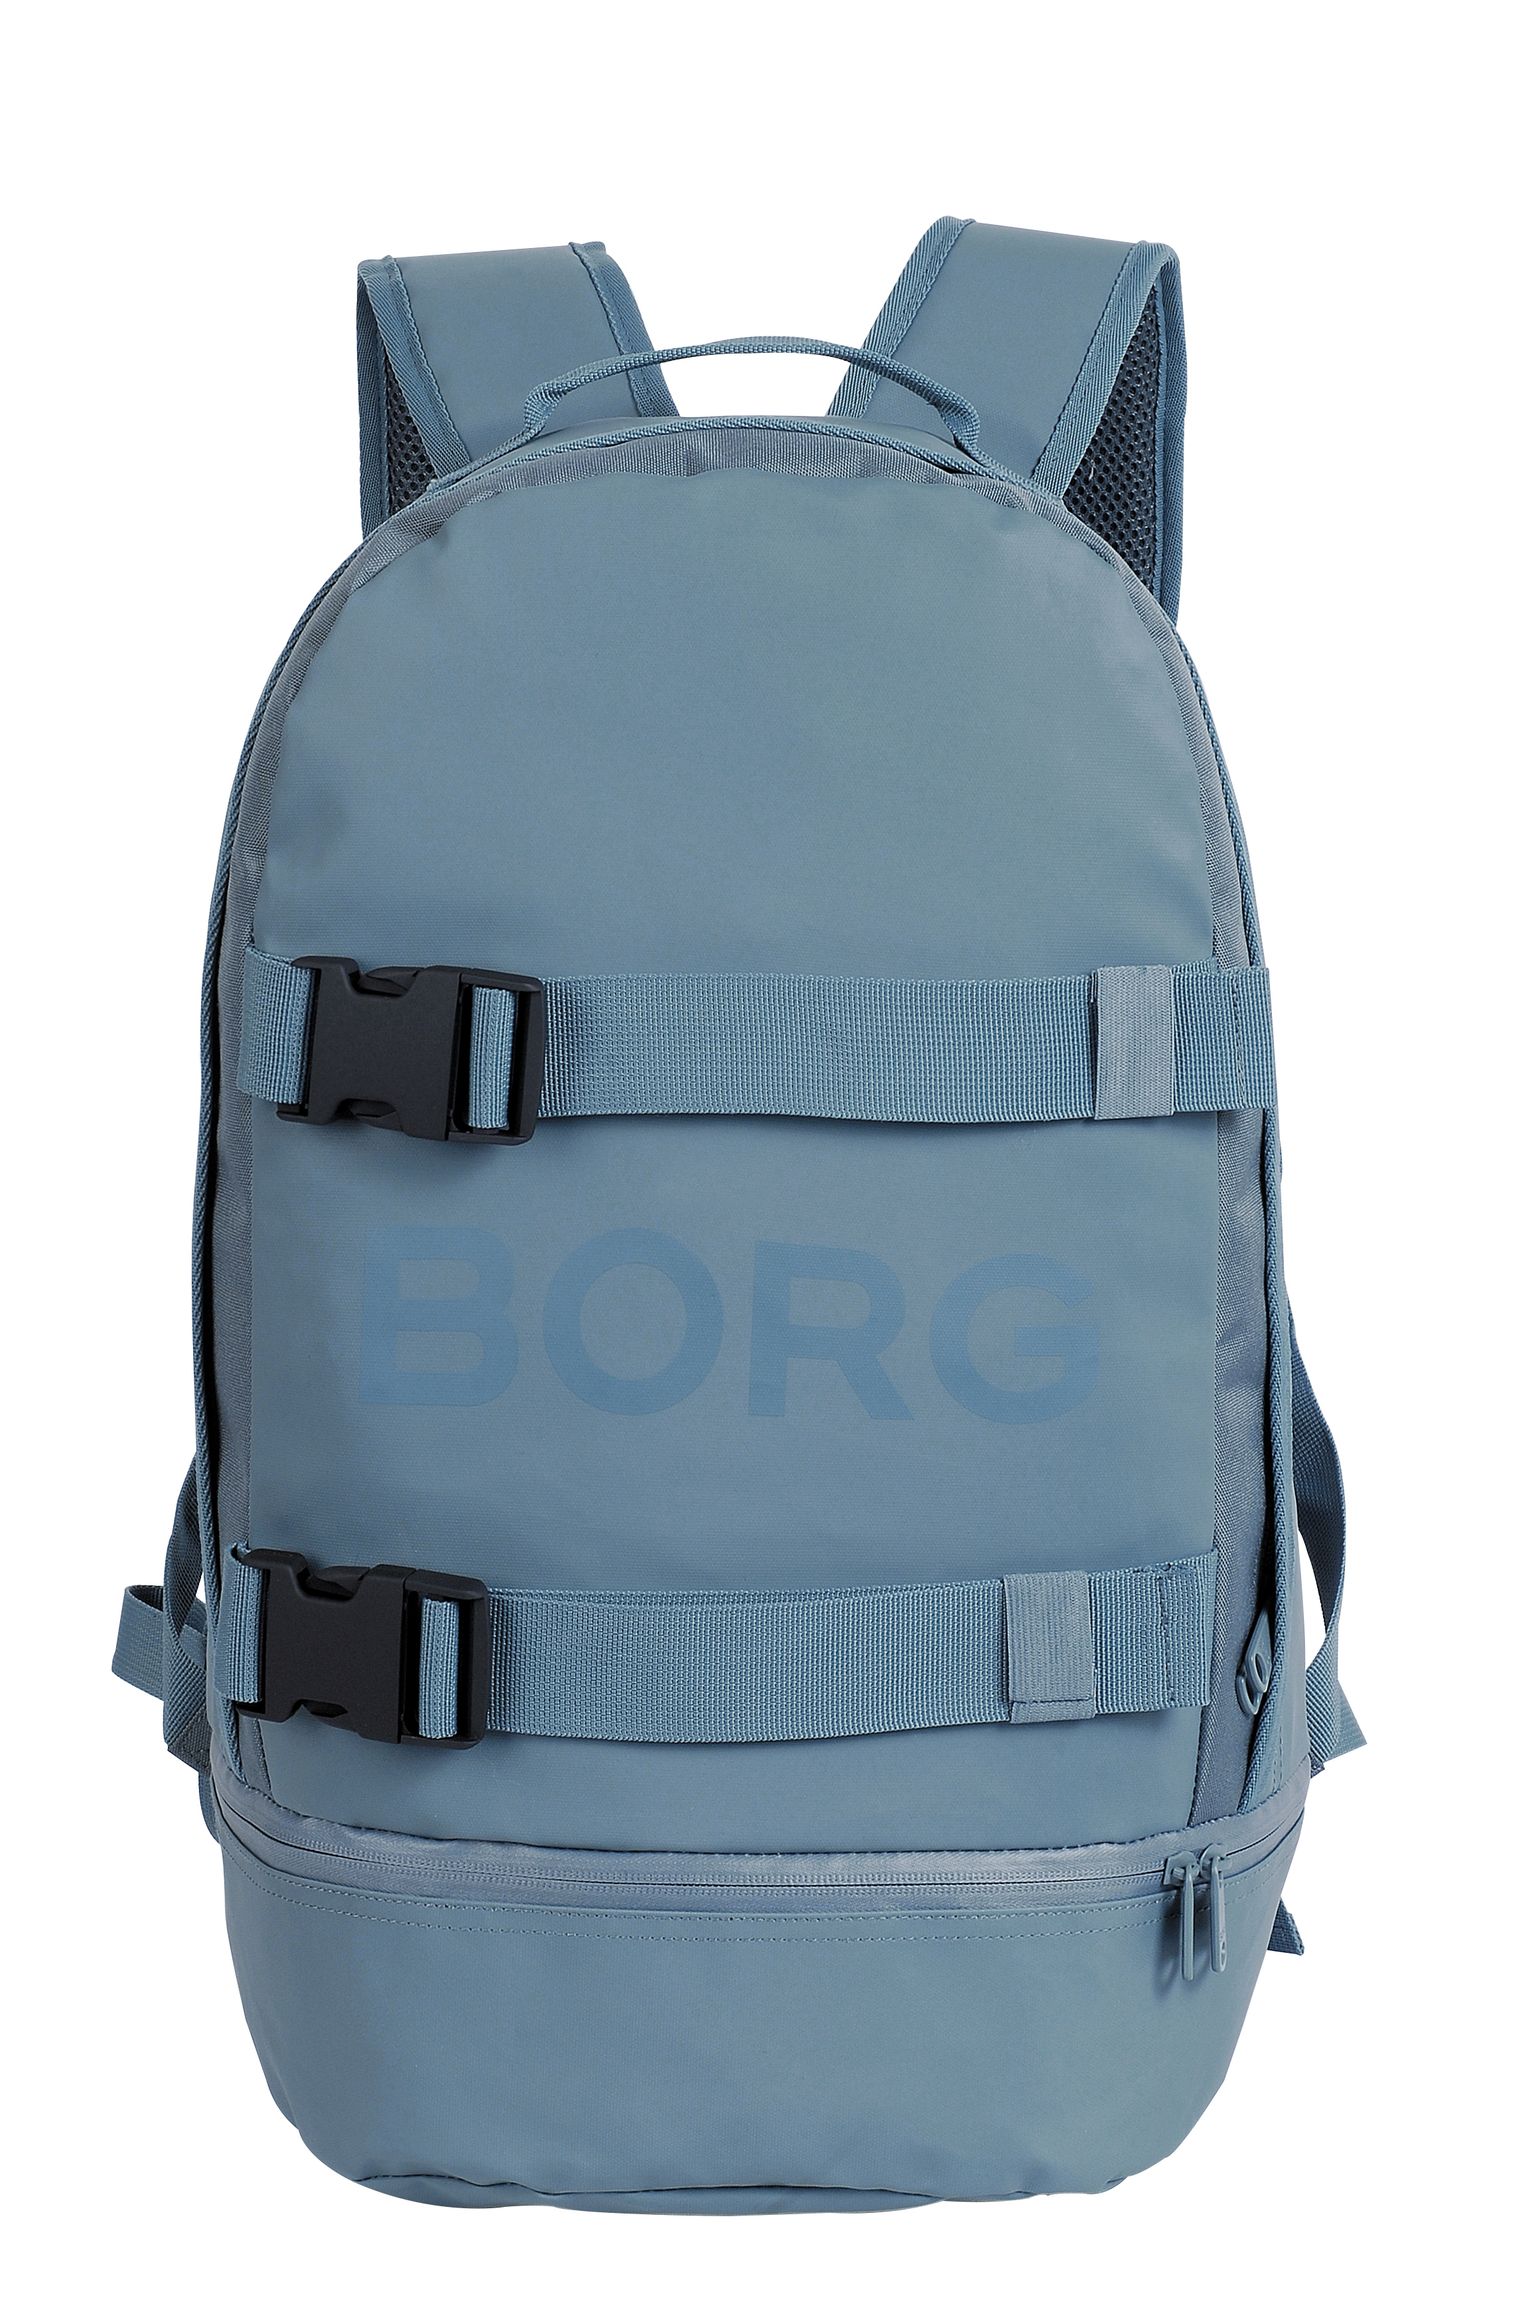 Björn Borg Borg Duffle Backpack 35L Stormy Weather